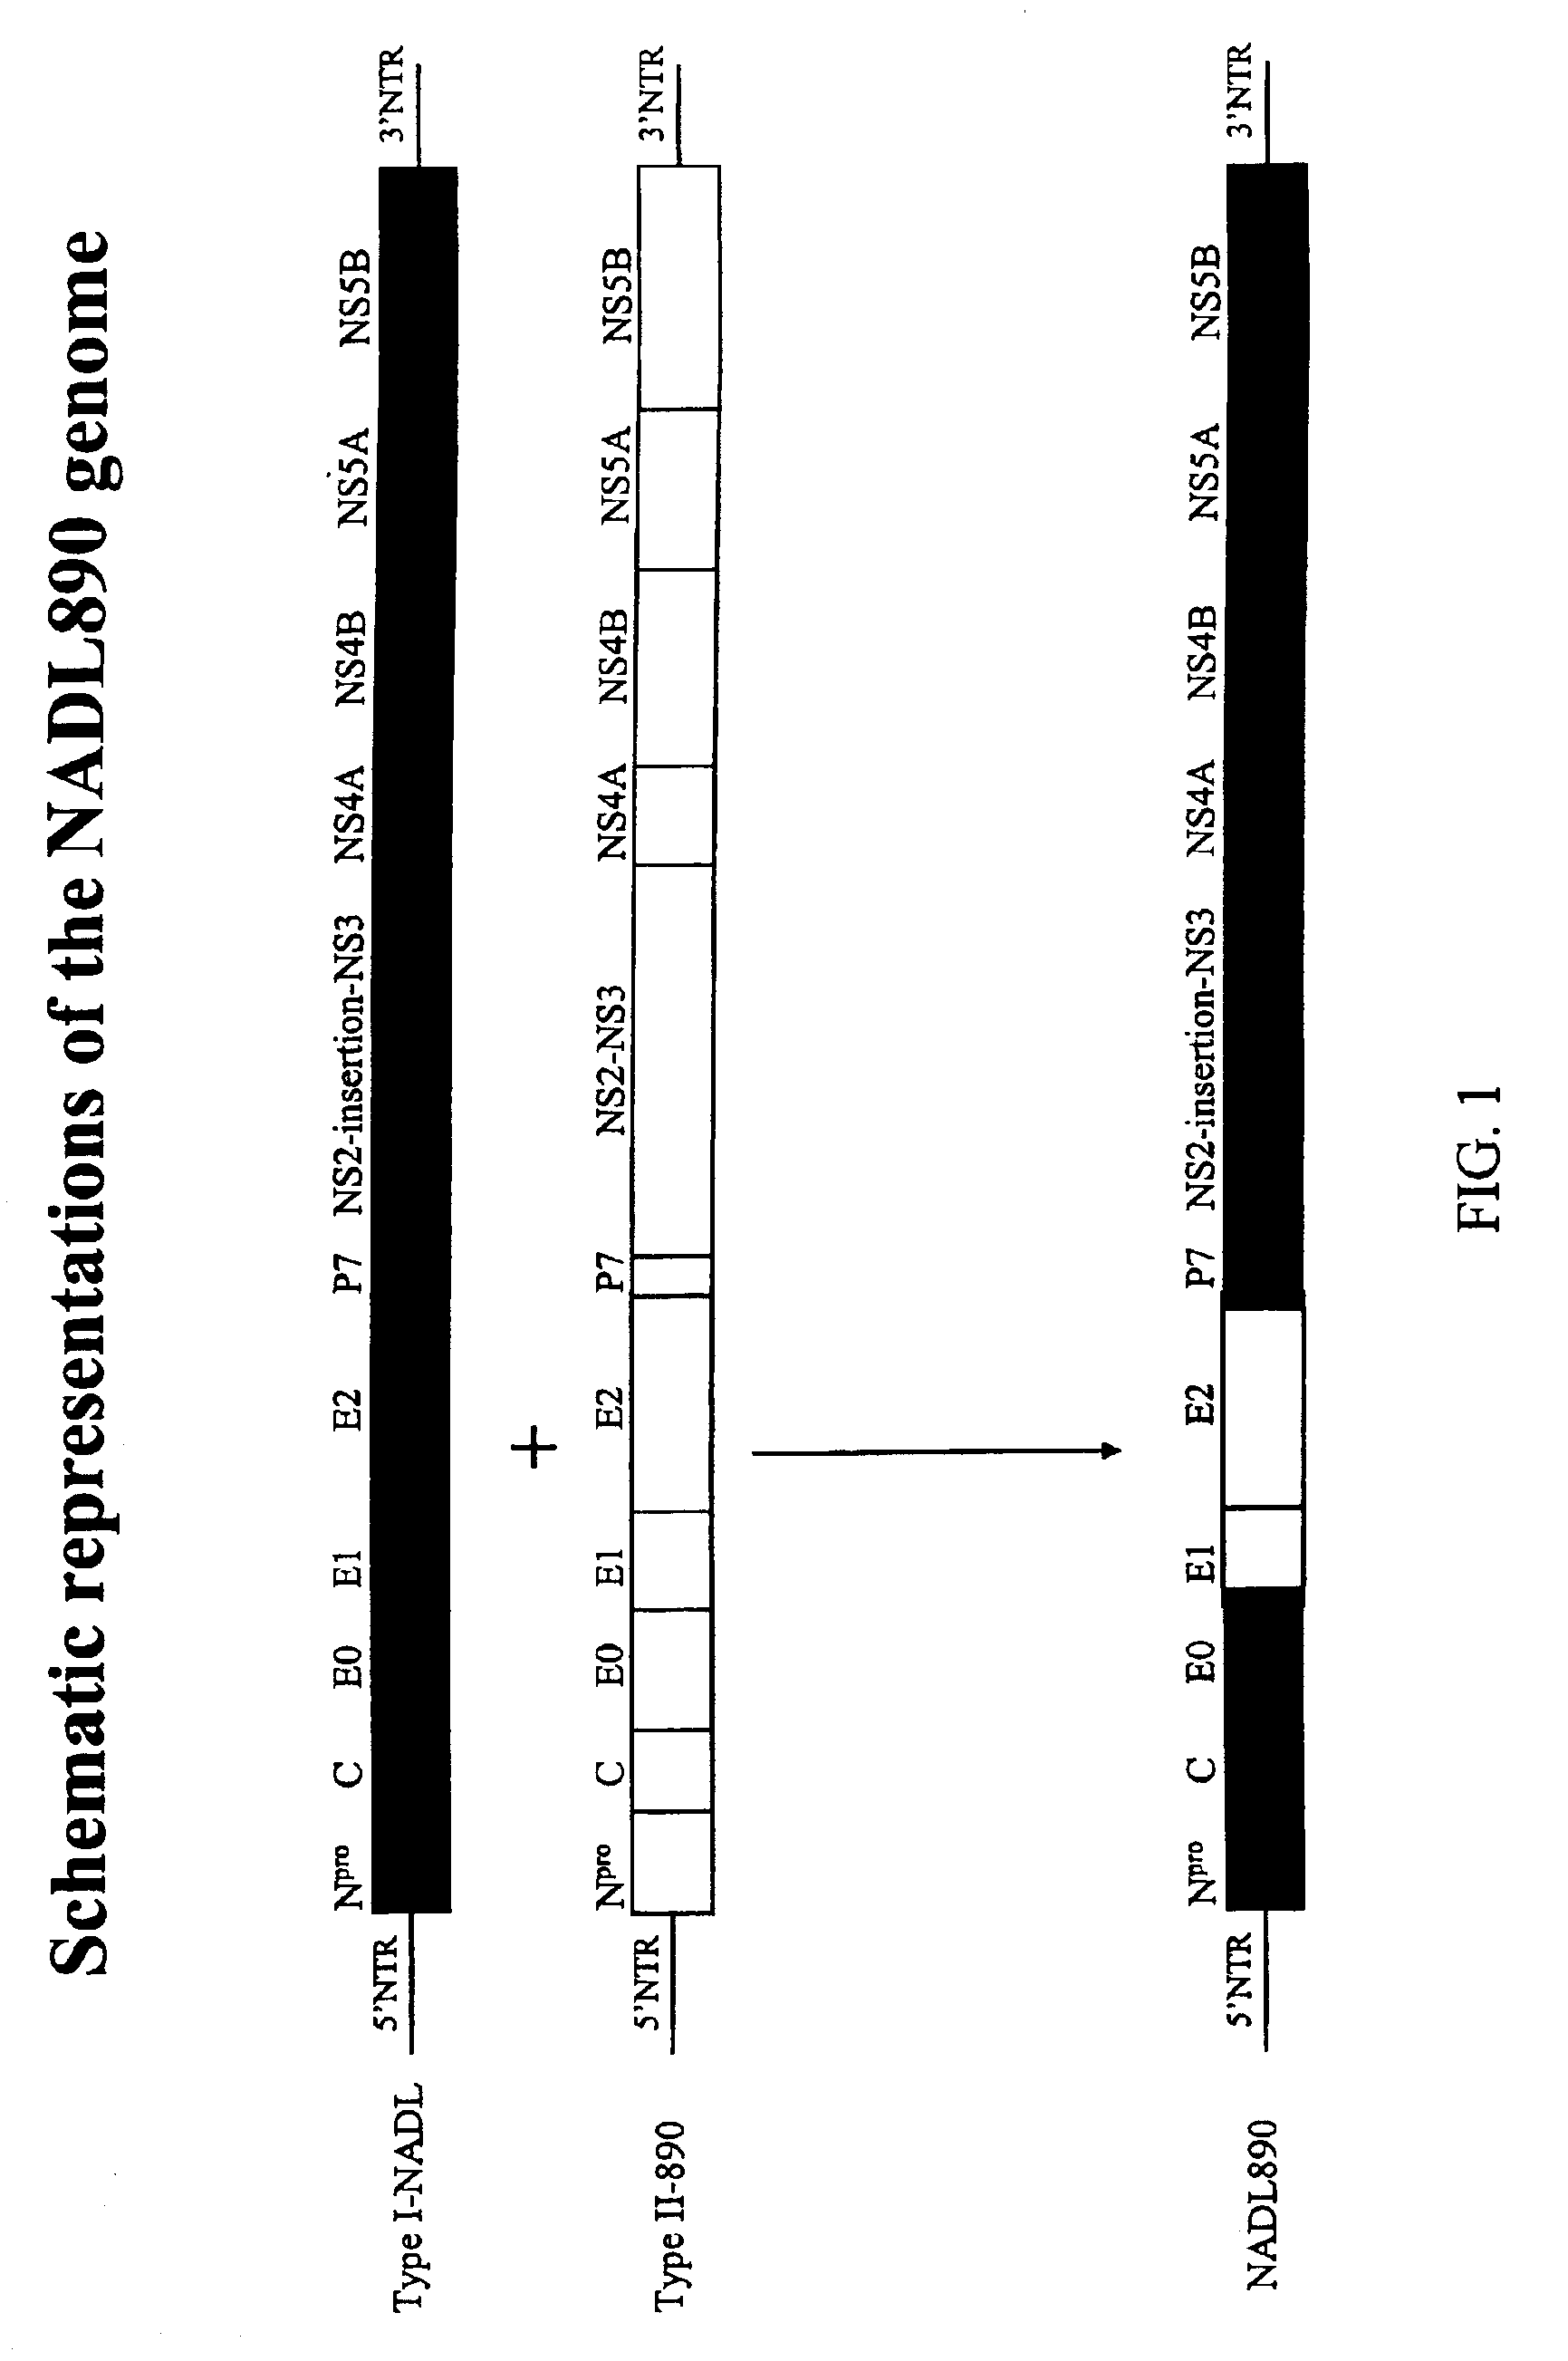 Generation of type I/type II hybrid form of bovine viral diarrhea virus for use as vaccine